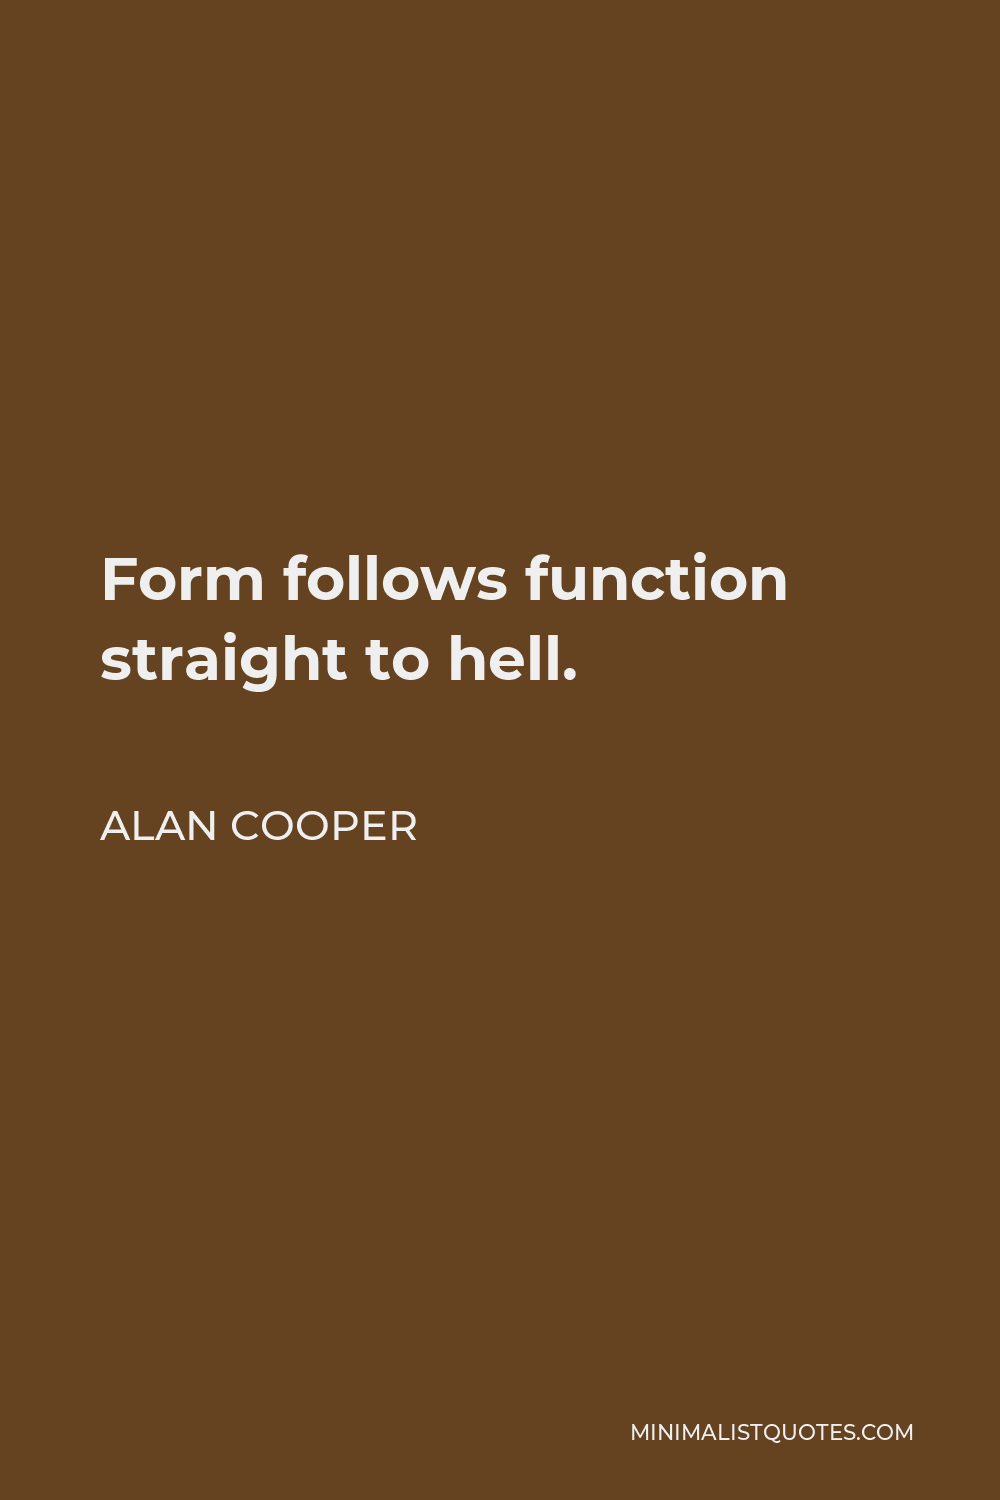 Alan Cooper Quote - Form follows function straight to hell.